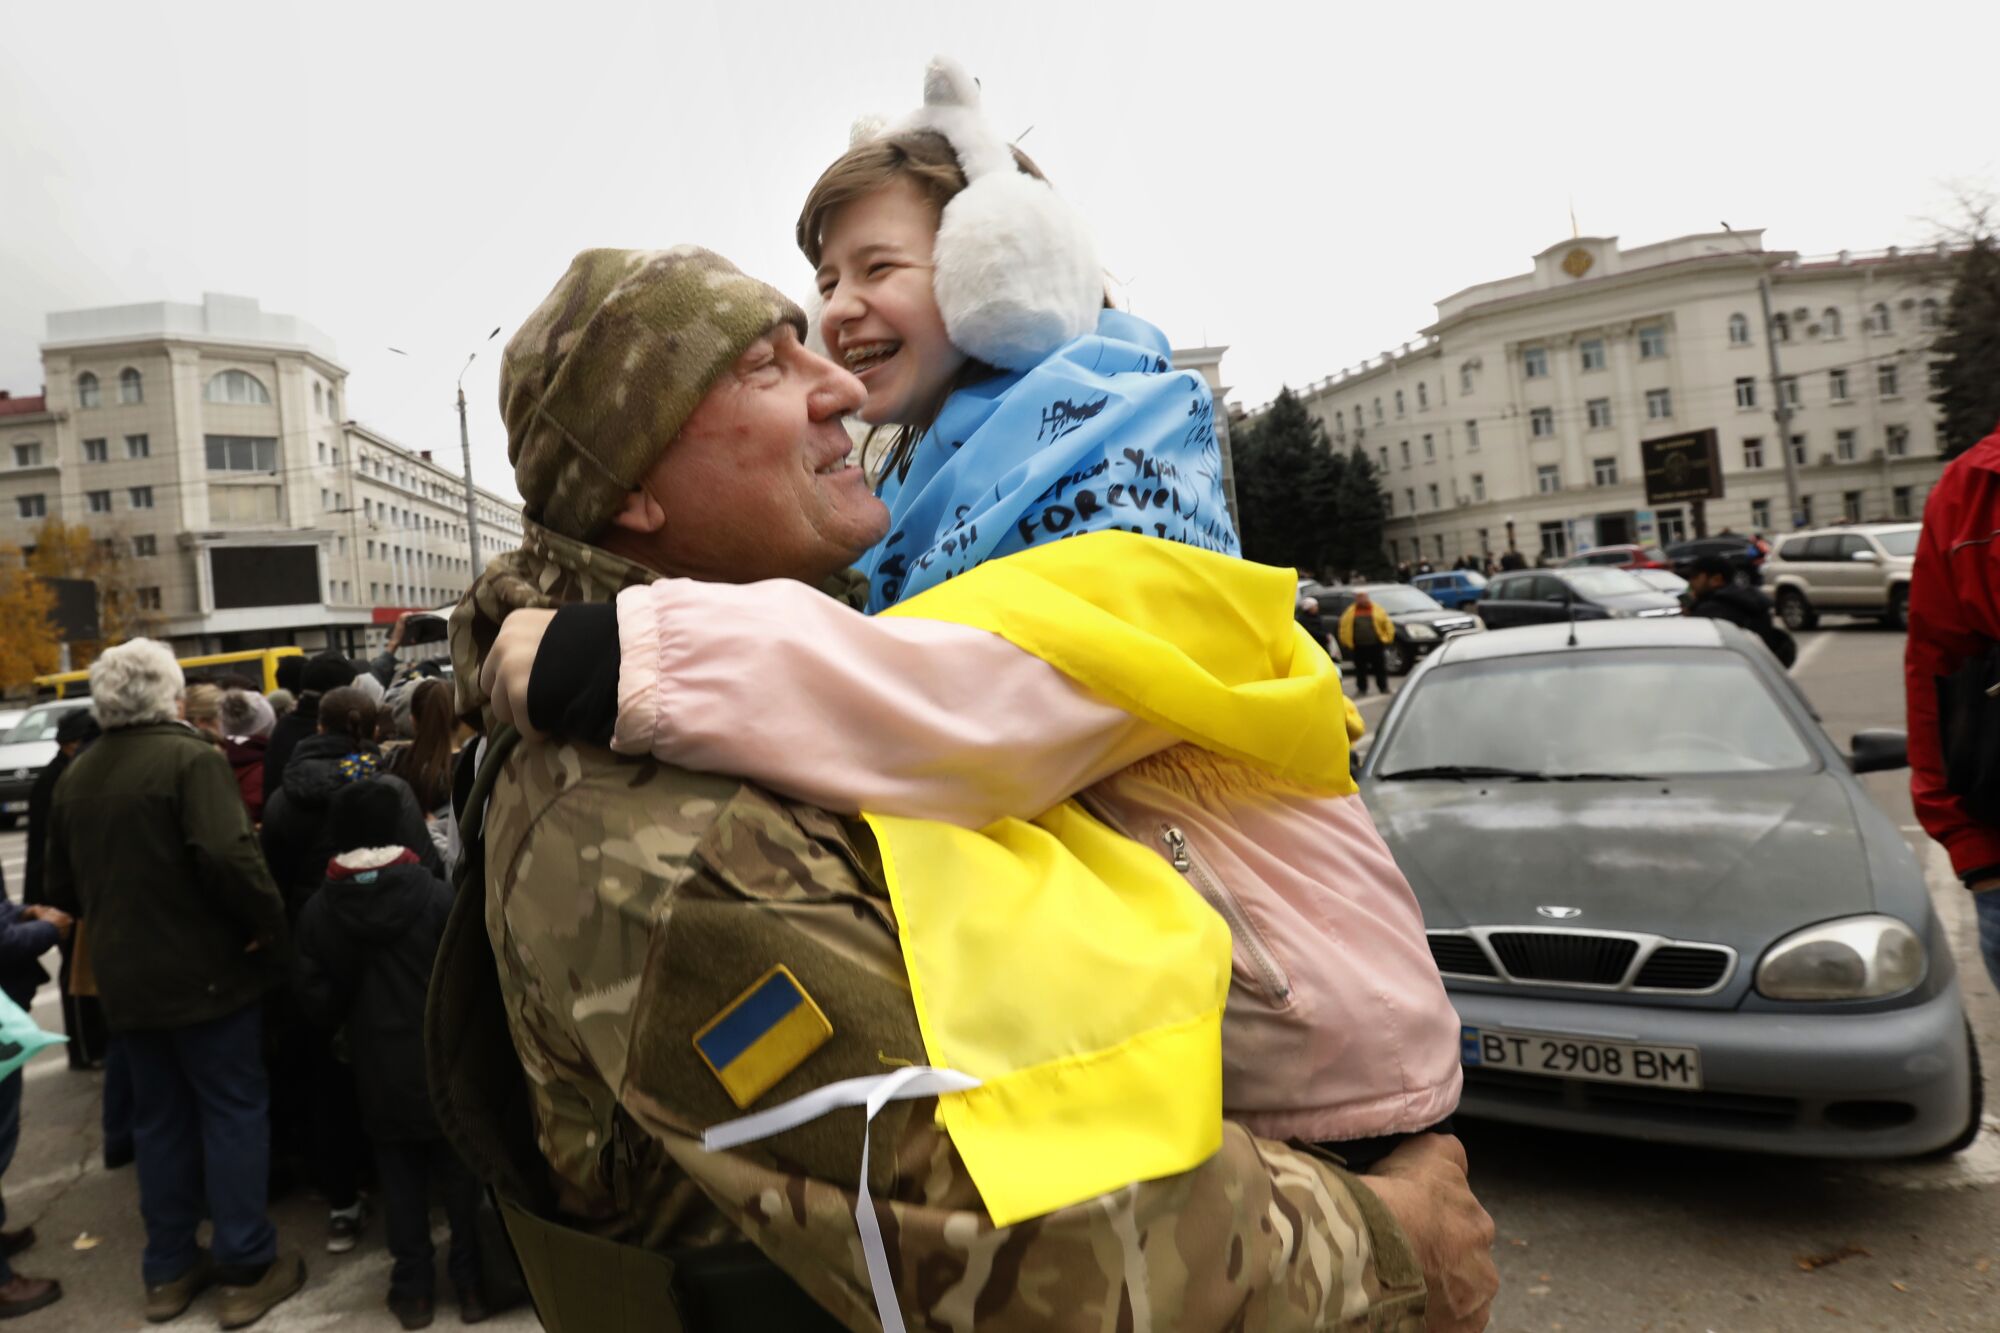 A man in military fatigues holds a smiling child wearing white earmuffs with a blue-and-yellow banner around her shoulders